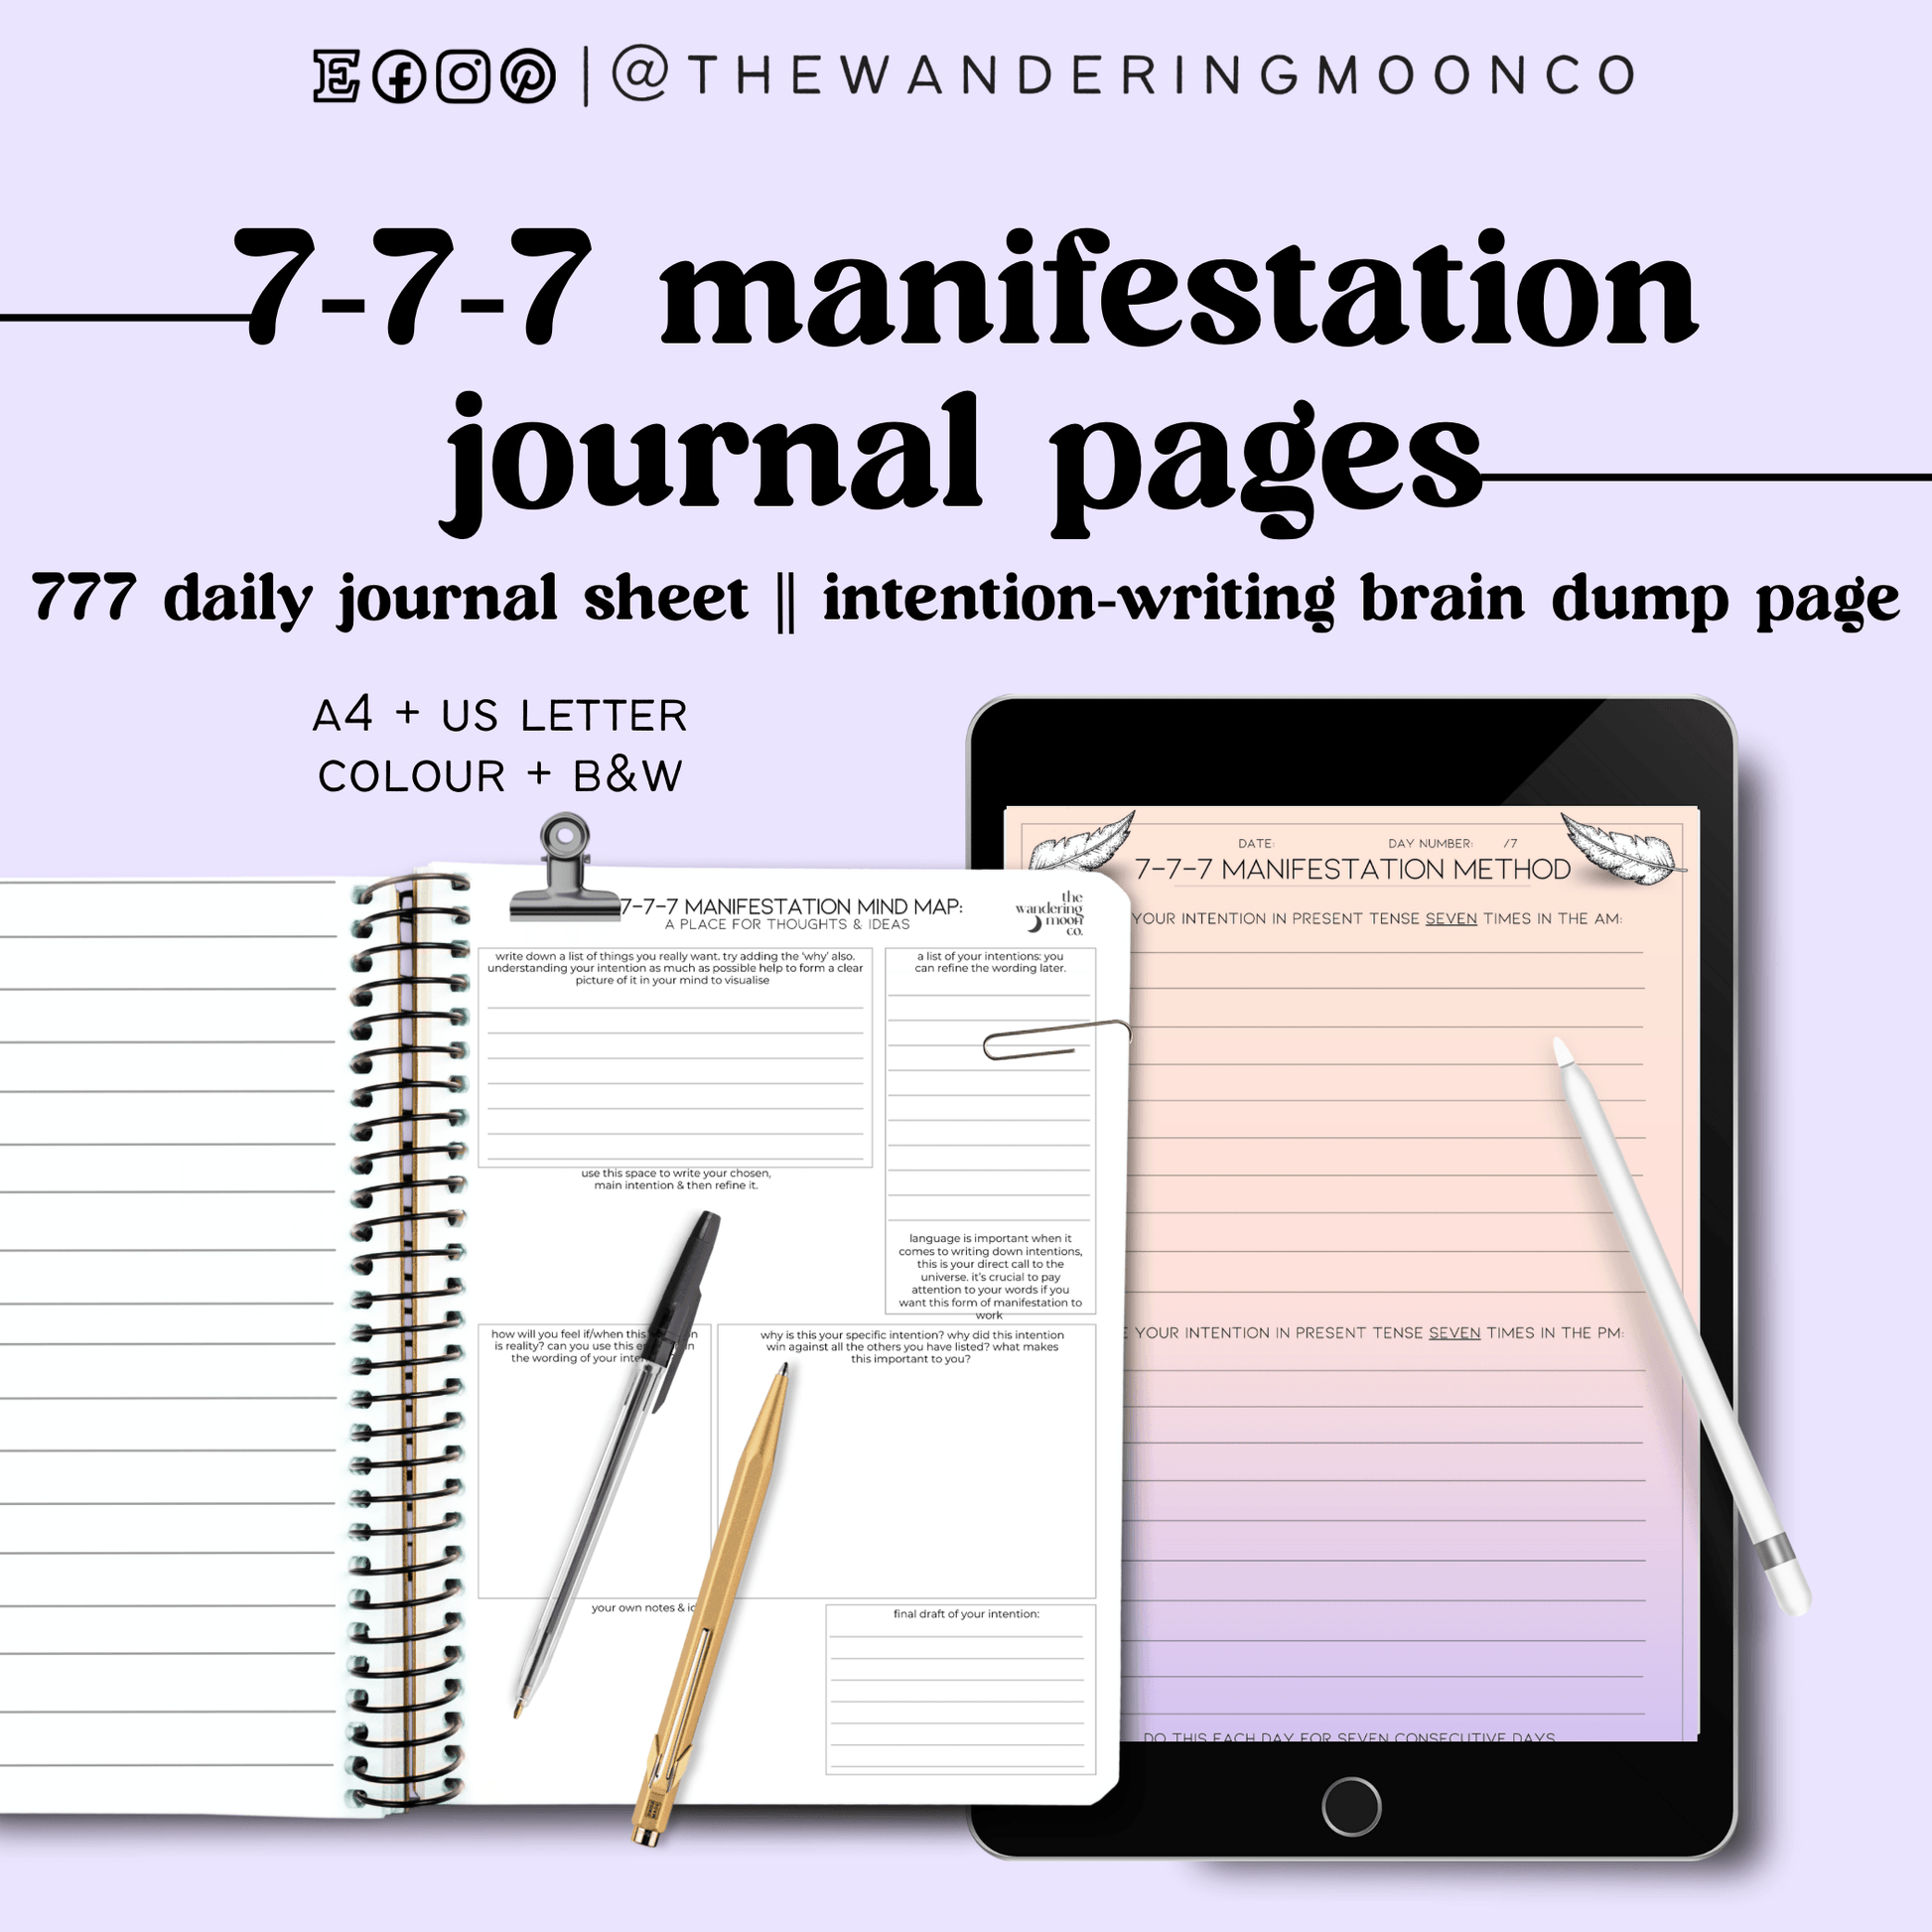 digital representation of the 777 manifestation journal page in colour & black and white 